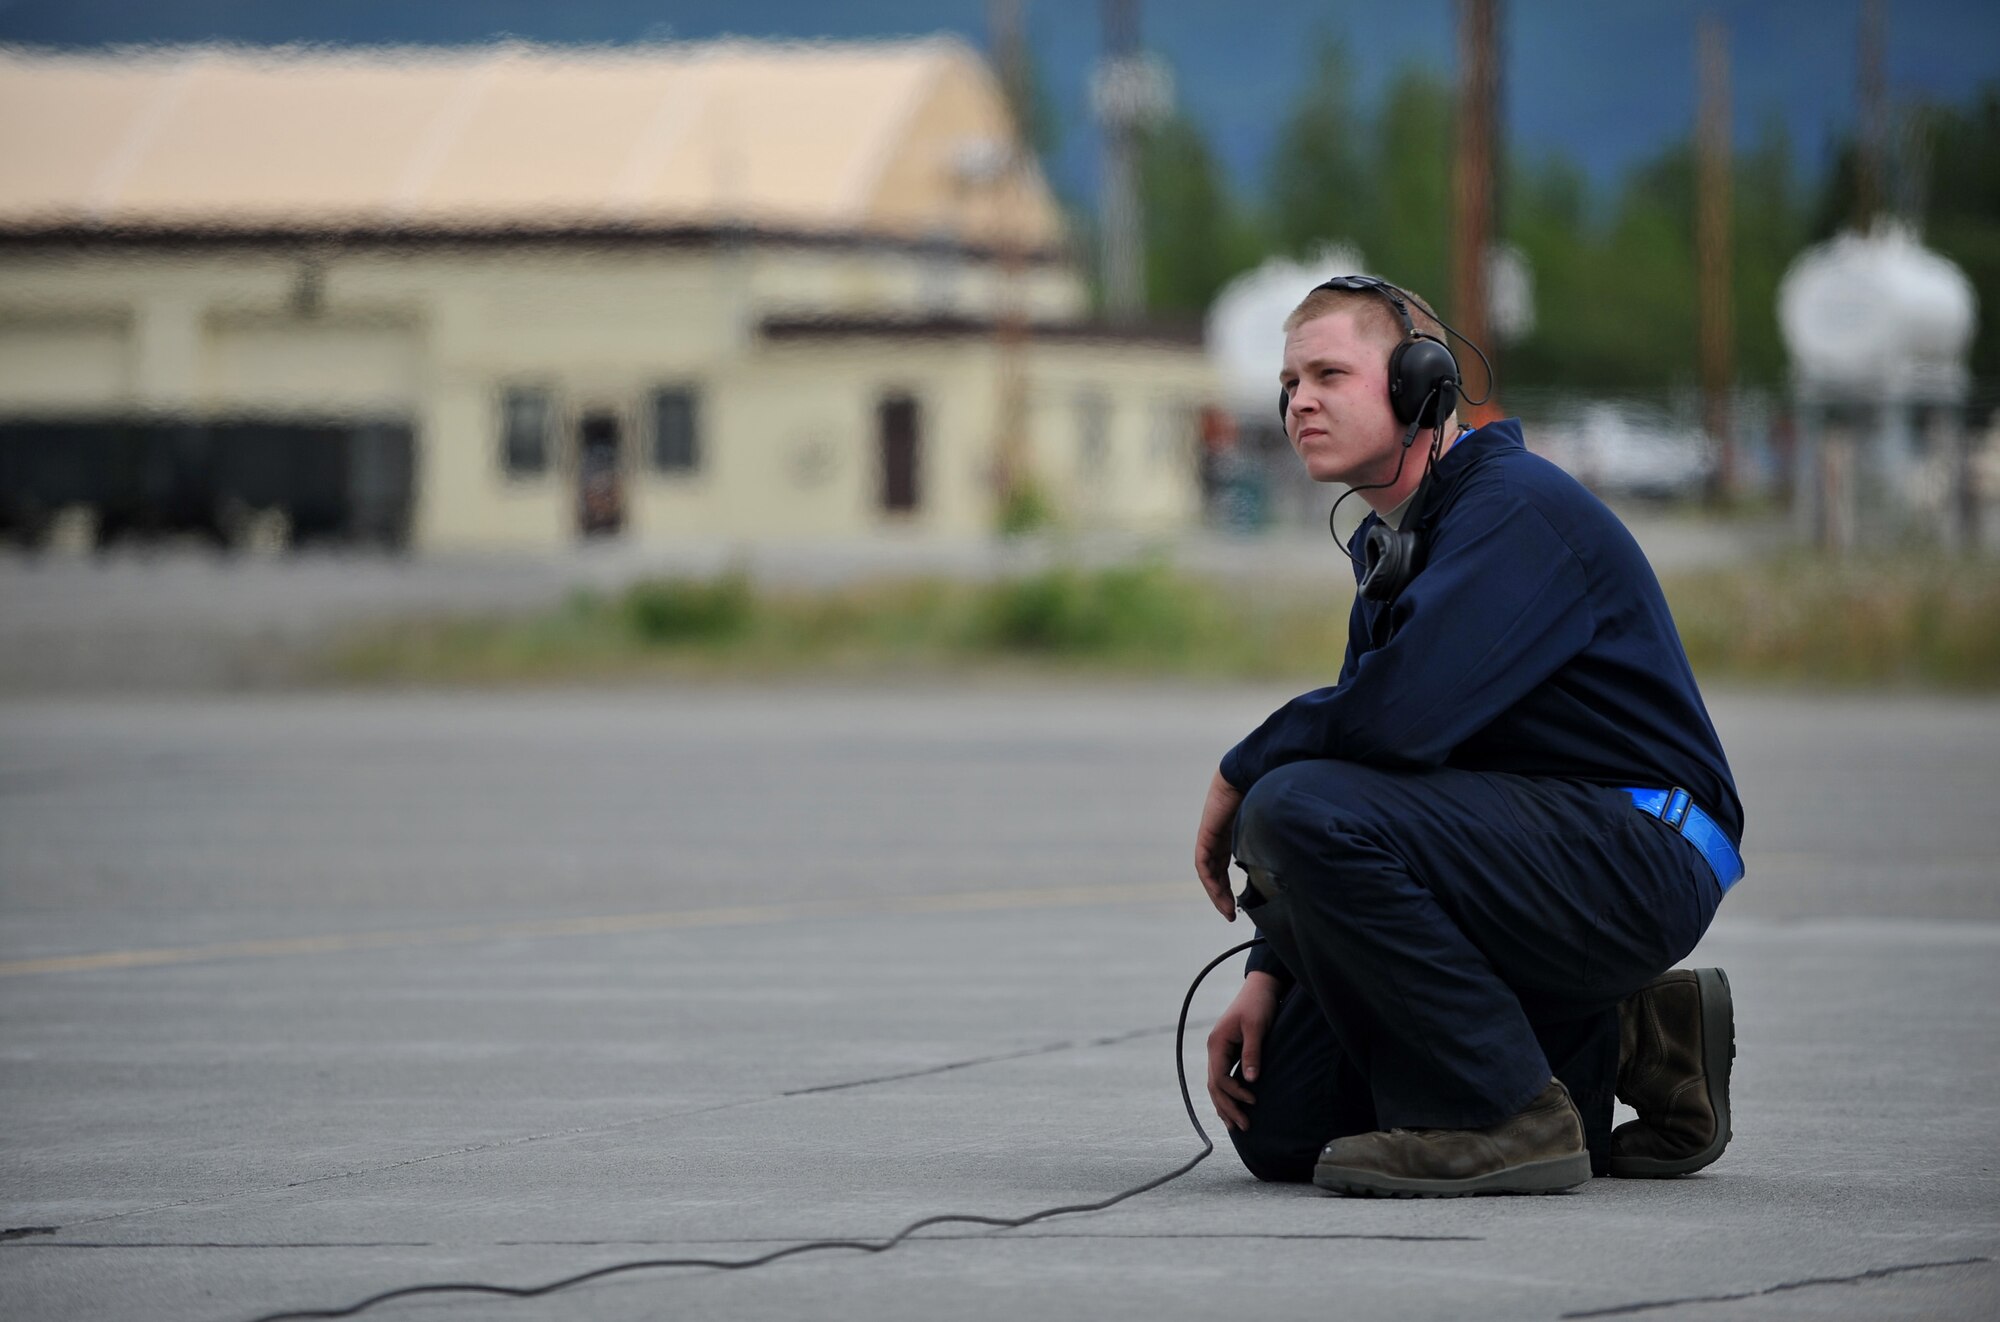 Airman 1st Class Shane Brewster prepares to launch his F-22 Raptor fighter aircraft for a mission June 17, 2009, during Northern Edge 09 held at Elmendorf Air Force Base, Alaska. Brewster is a member of the 525th Aircarft Maintenance Unit at Elmendorf AFB. Northern Edge is Alaska's largest military training exercise that prepares joint forces to respond to crises throughout the Asia-Pacific region. (U.S. Air Force photo/Master Sgt. Shane A. Cuomo)
